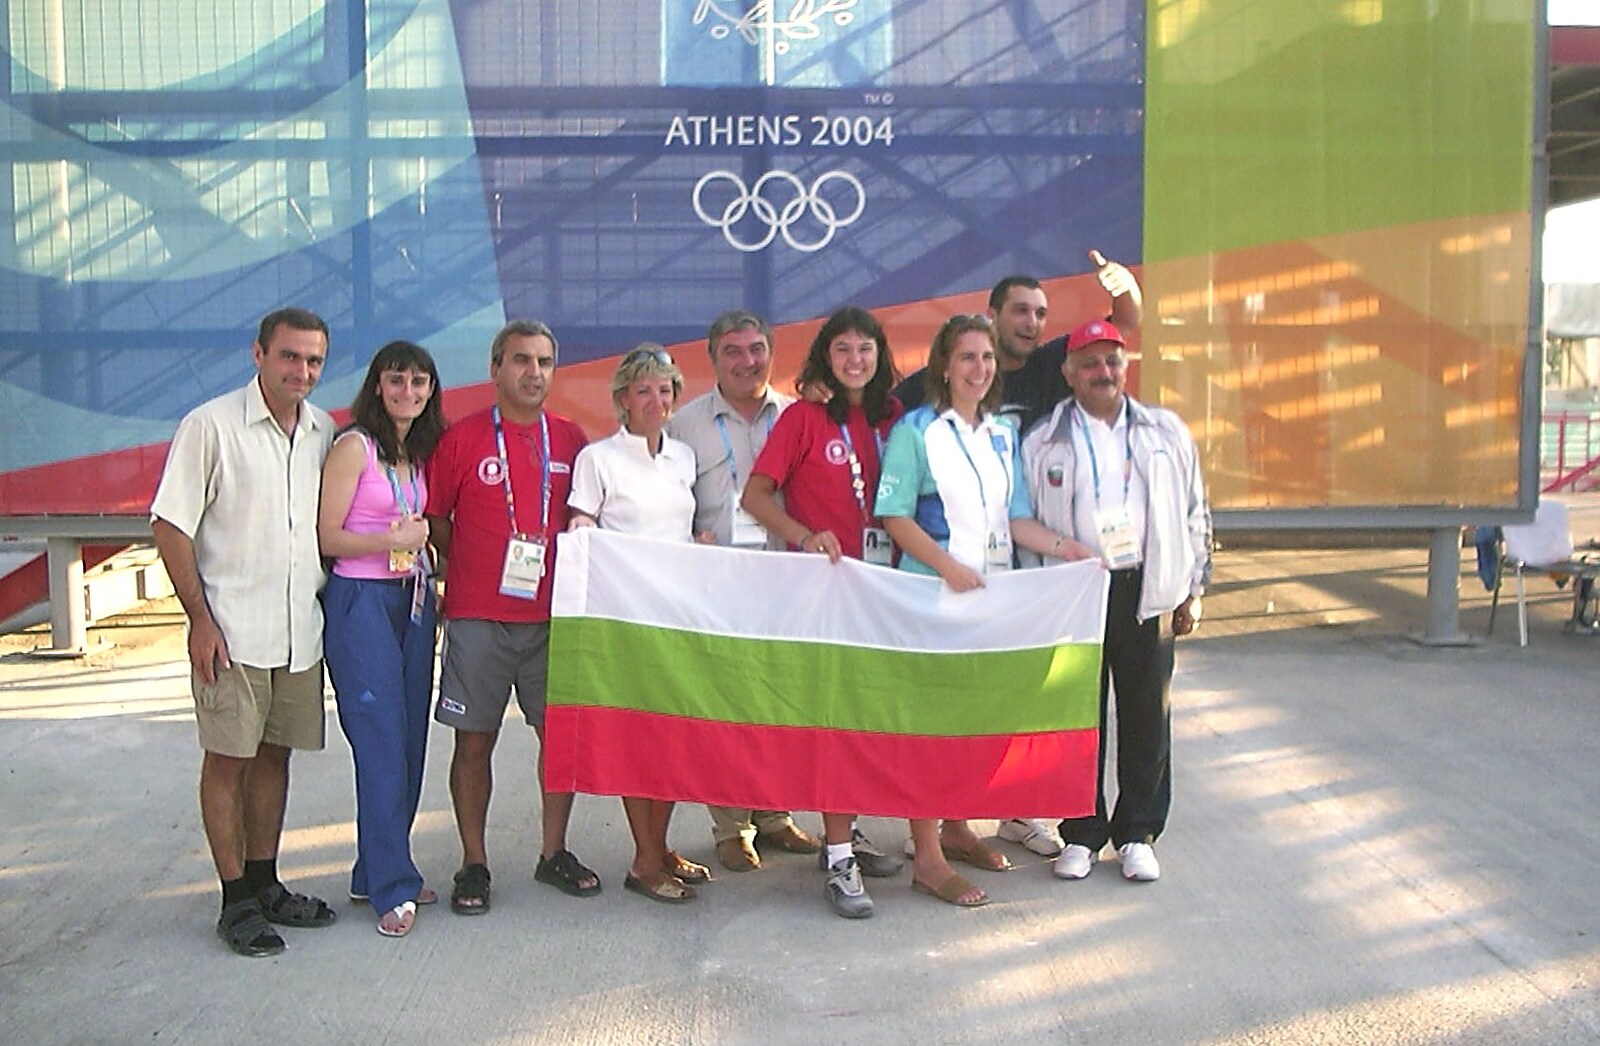 A Postcard From Athens: A Day Trip to the Olympics, Greece - 19th August 2004: Outside, the Romanian team pose for a photo